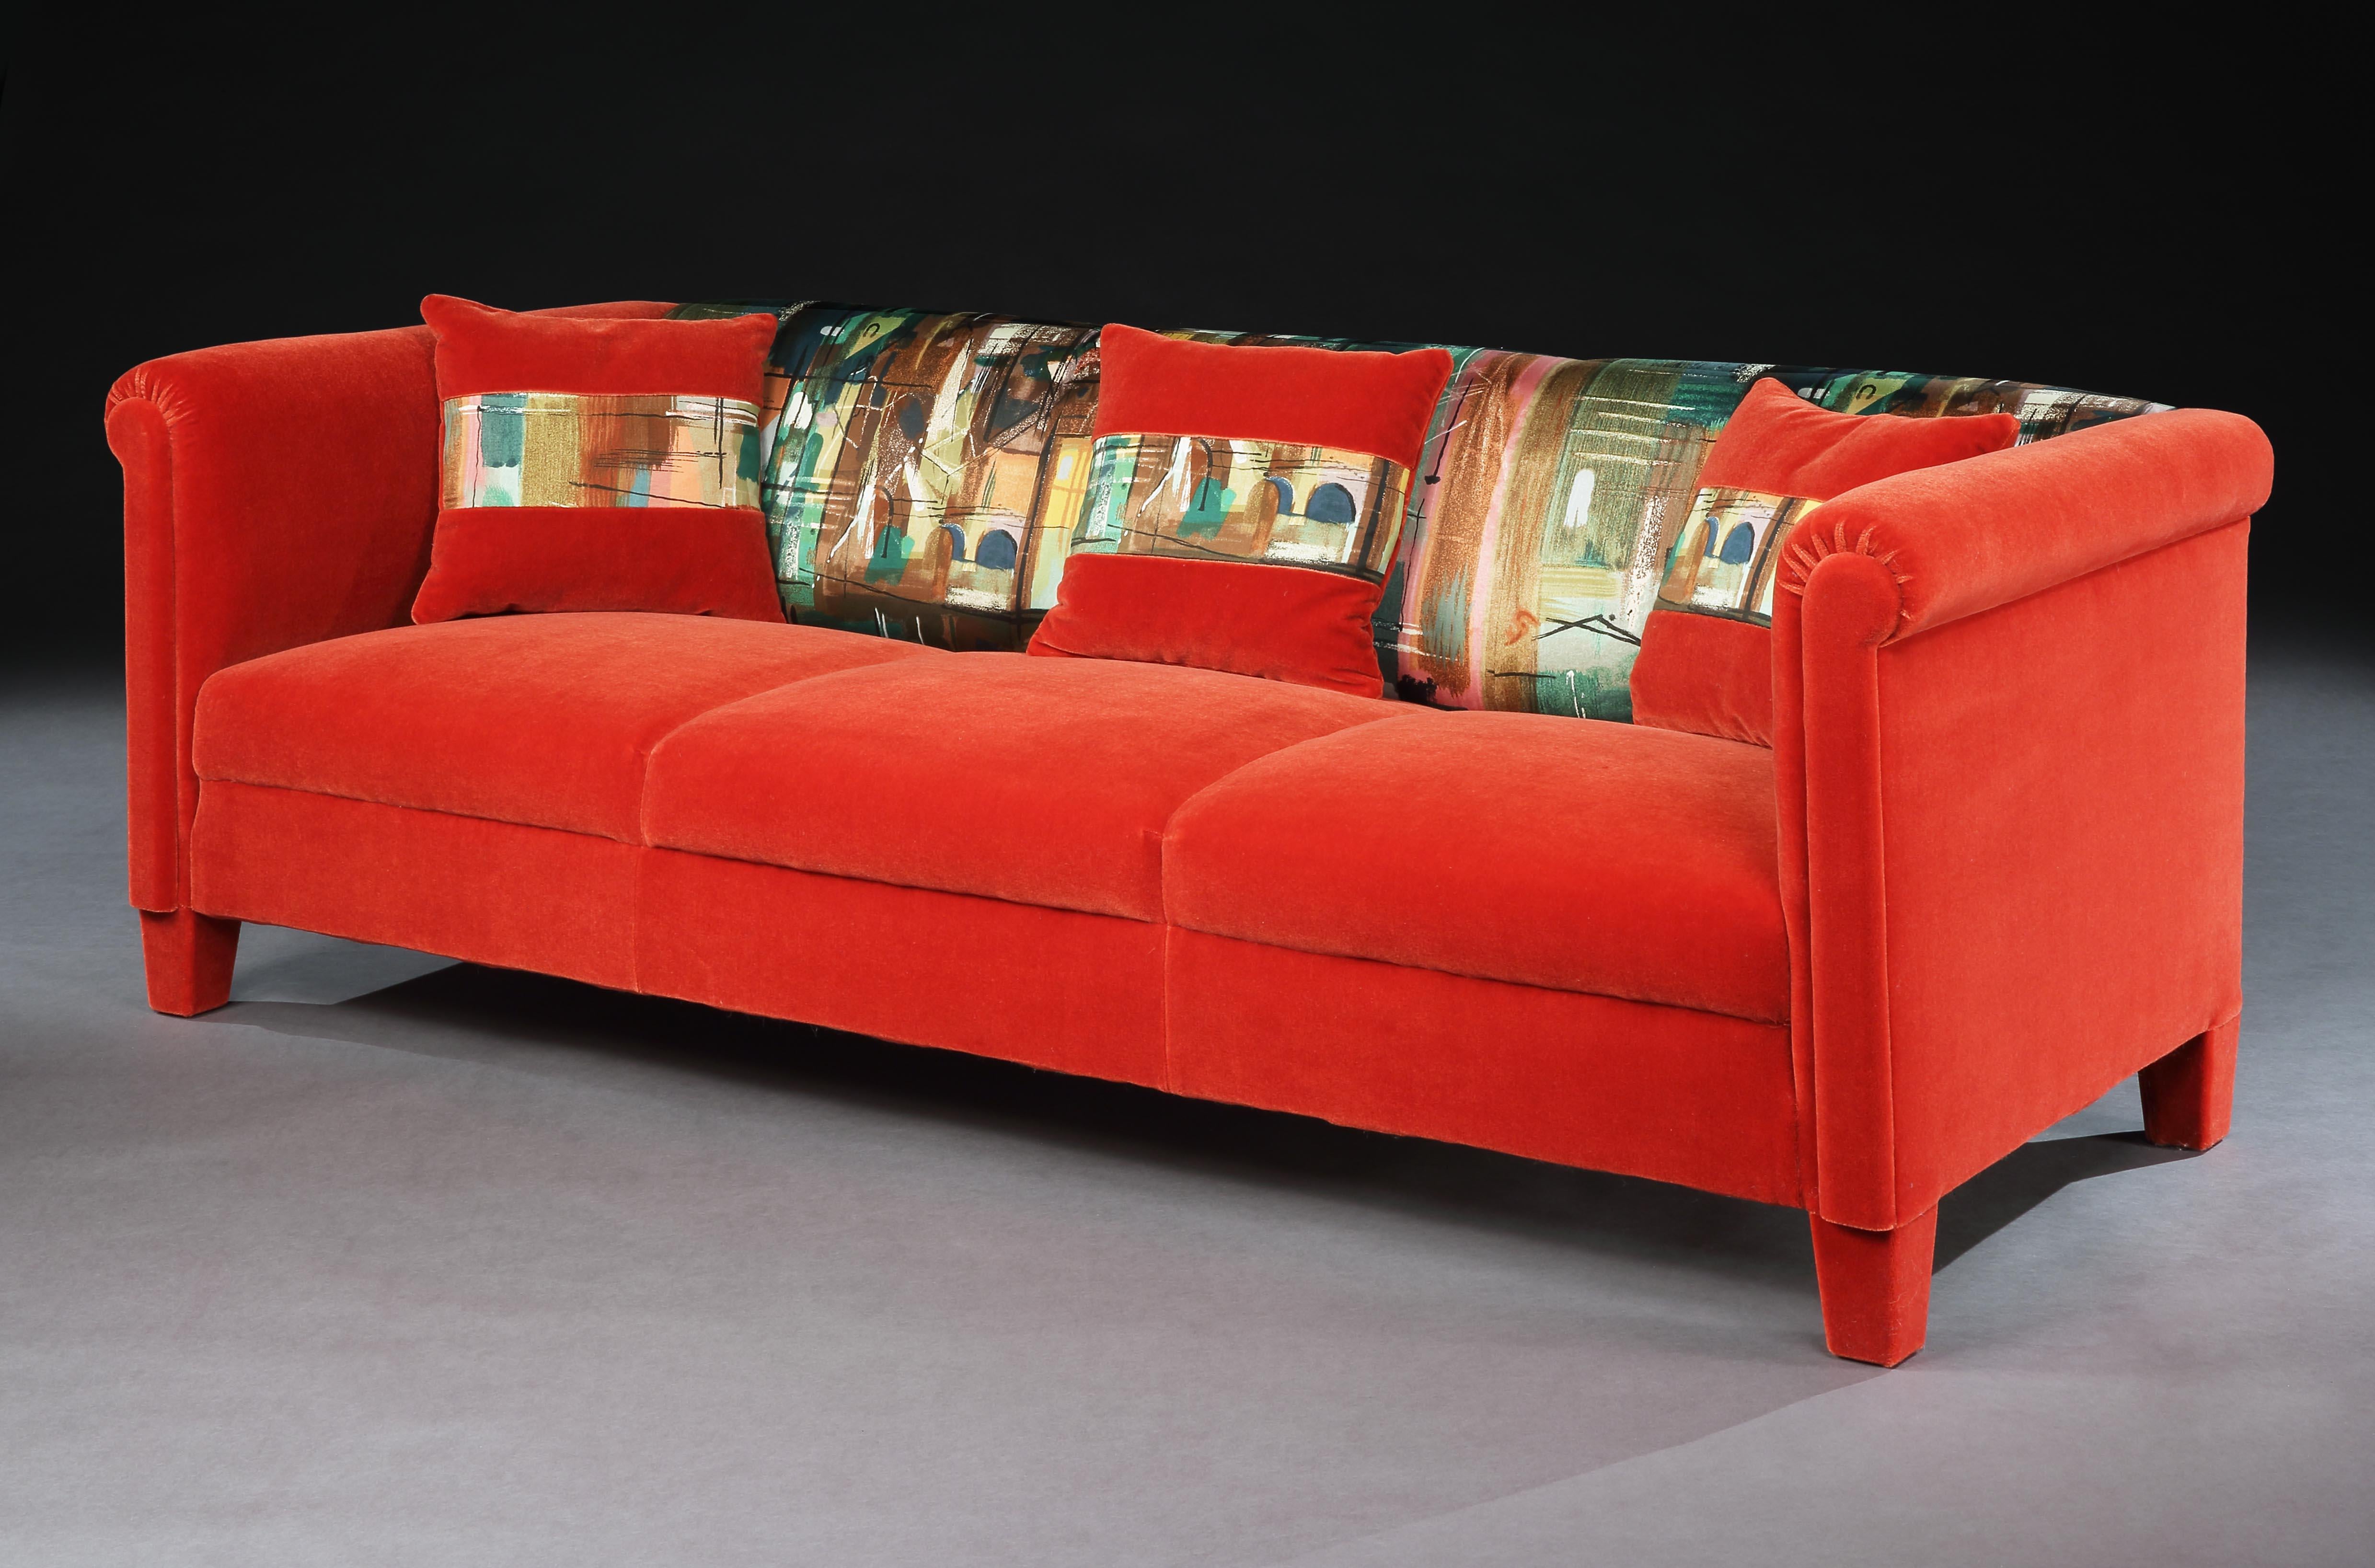 Incorporating 'Stones of Bath' into this settee is inspired the pipers use of one of the five designs commissioned for their centenary, ‘The Glyders’, as loose covers for the chairs at their home Fawley bottom which John Betjeman called ‘Fawley